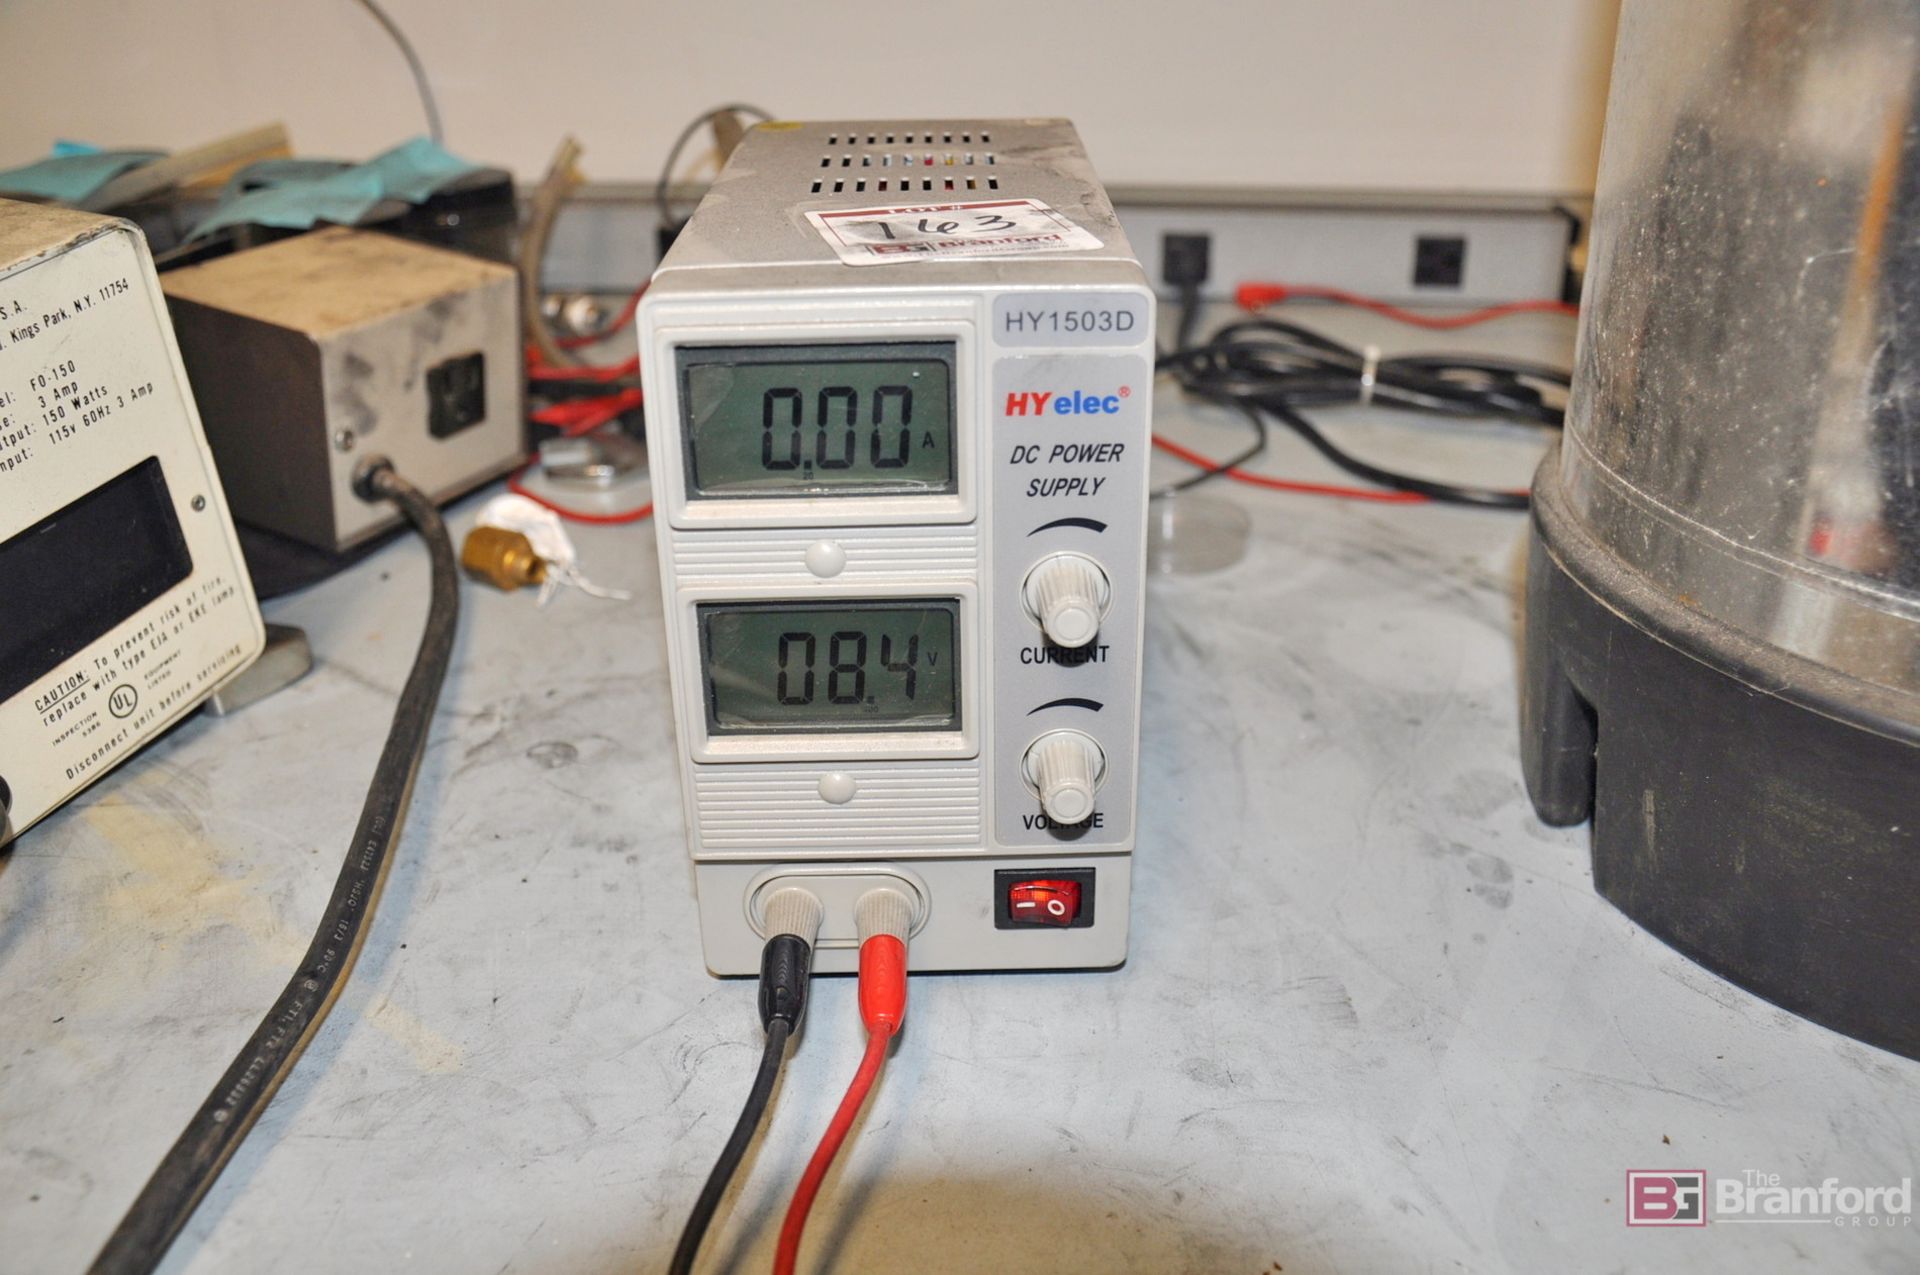 Hy elec HY1503D DC power supply - Image 3 of 3